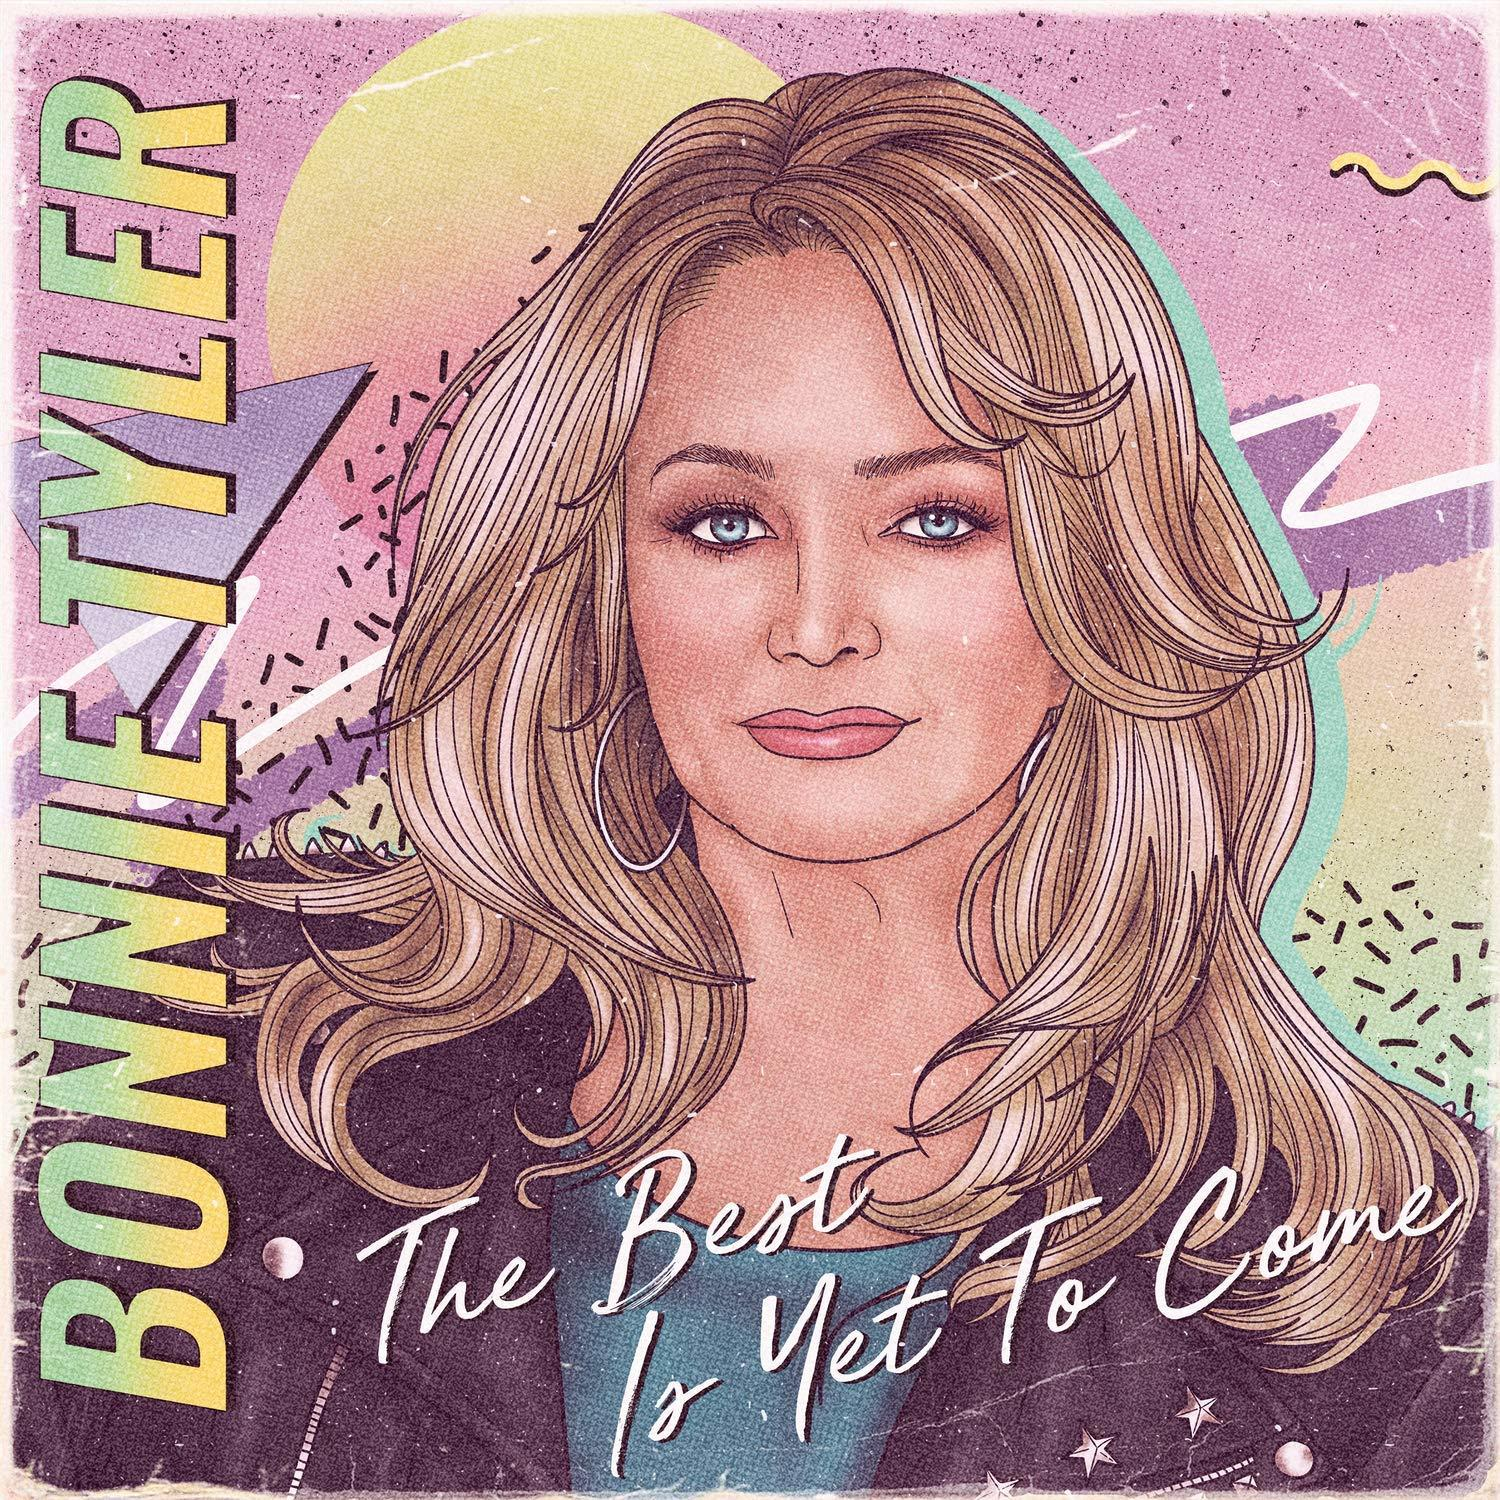 Bonnie Tyler - Best Is Come Yet (CD) To 